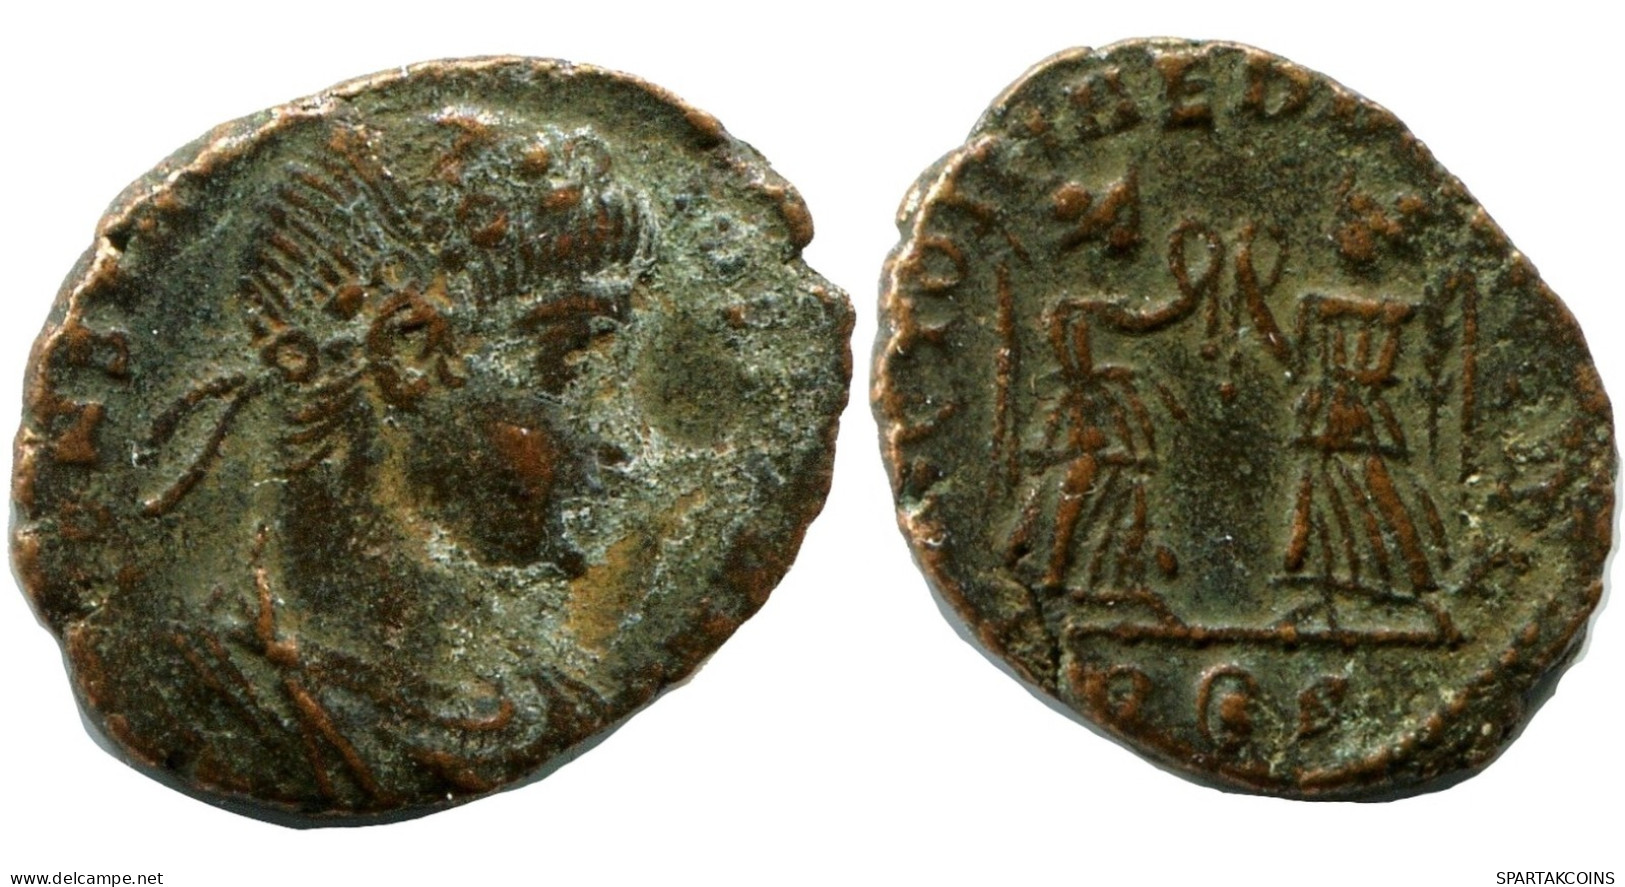 CONSTANS MINTED IN ROME ITALY FROM THE ROYAL ONTARIO MUSEUM #ANC11543.14.F.A - Der Christlischen Kaiser (307 / 363)